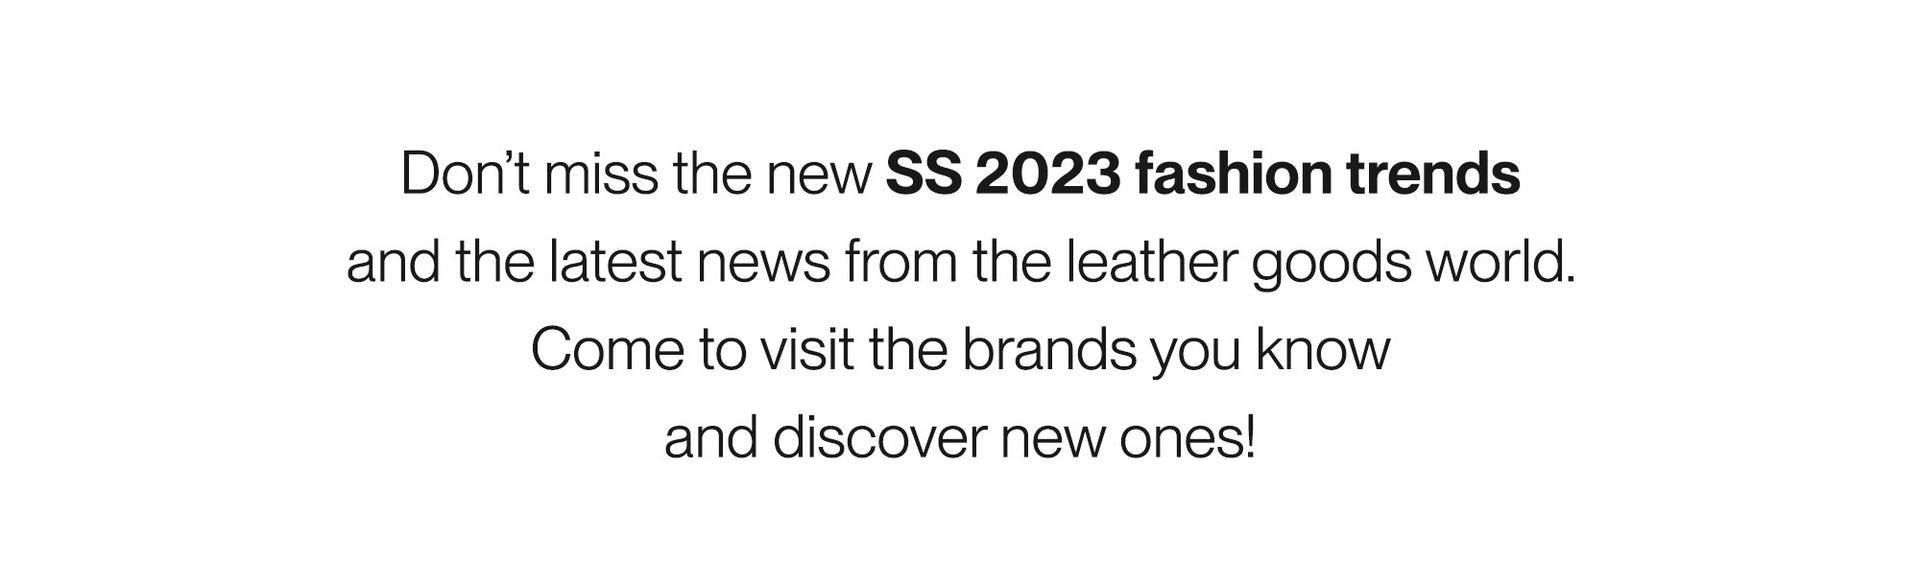 Don't miss the new SS23 fashion trends and much more